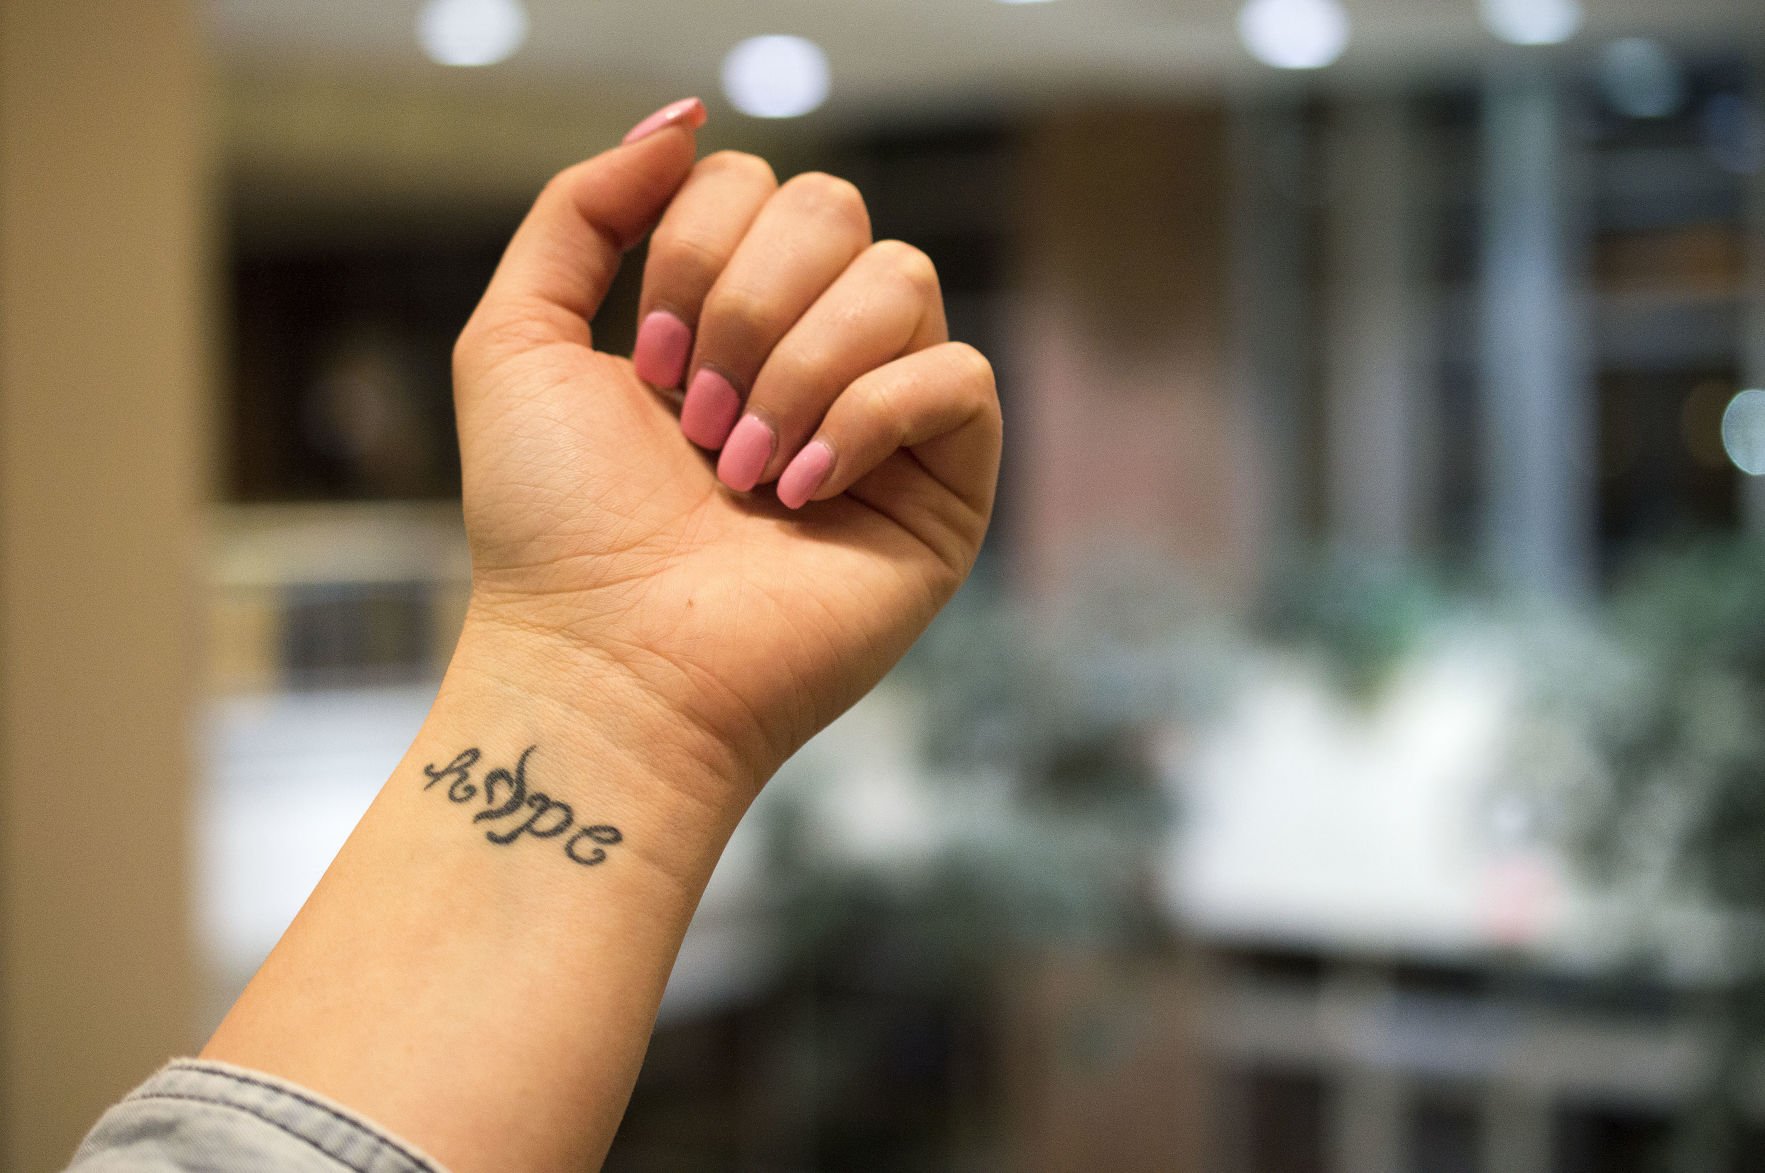 Eating Disorder Recovery  Recovery Tattoos